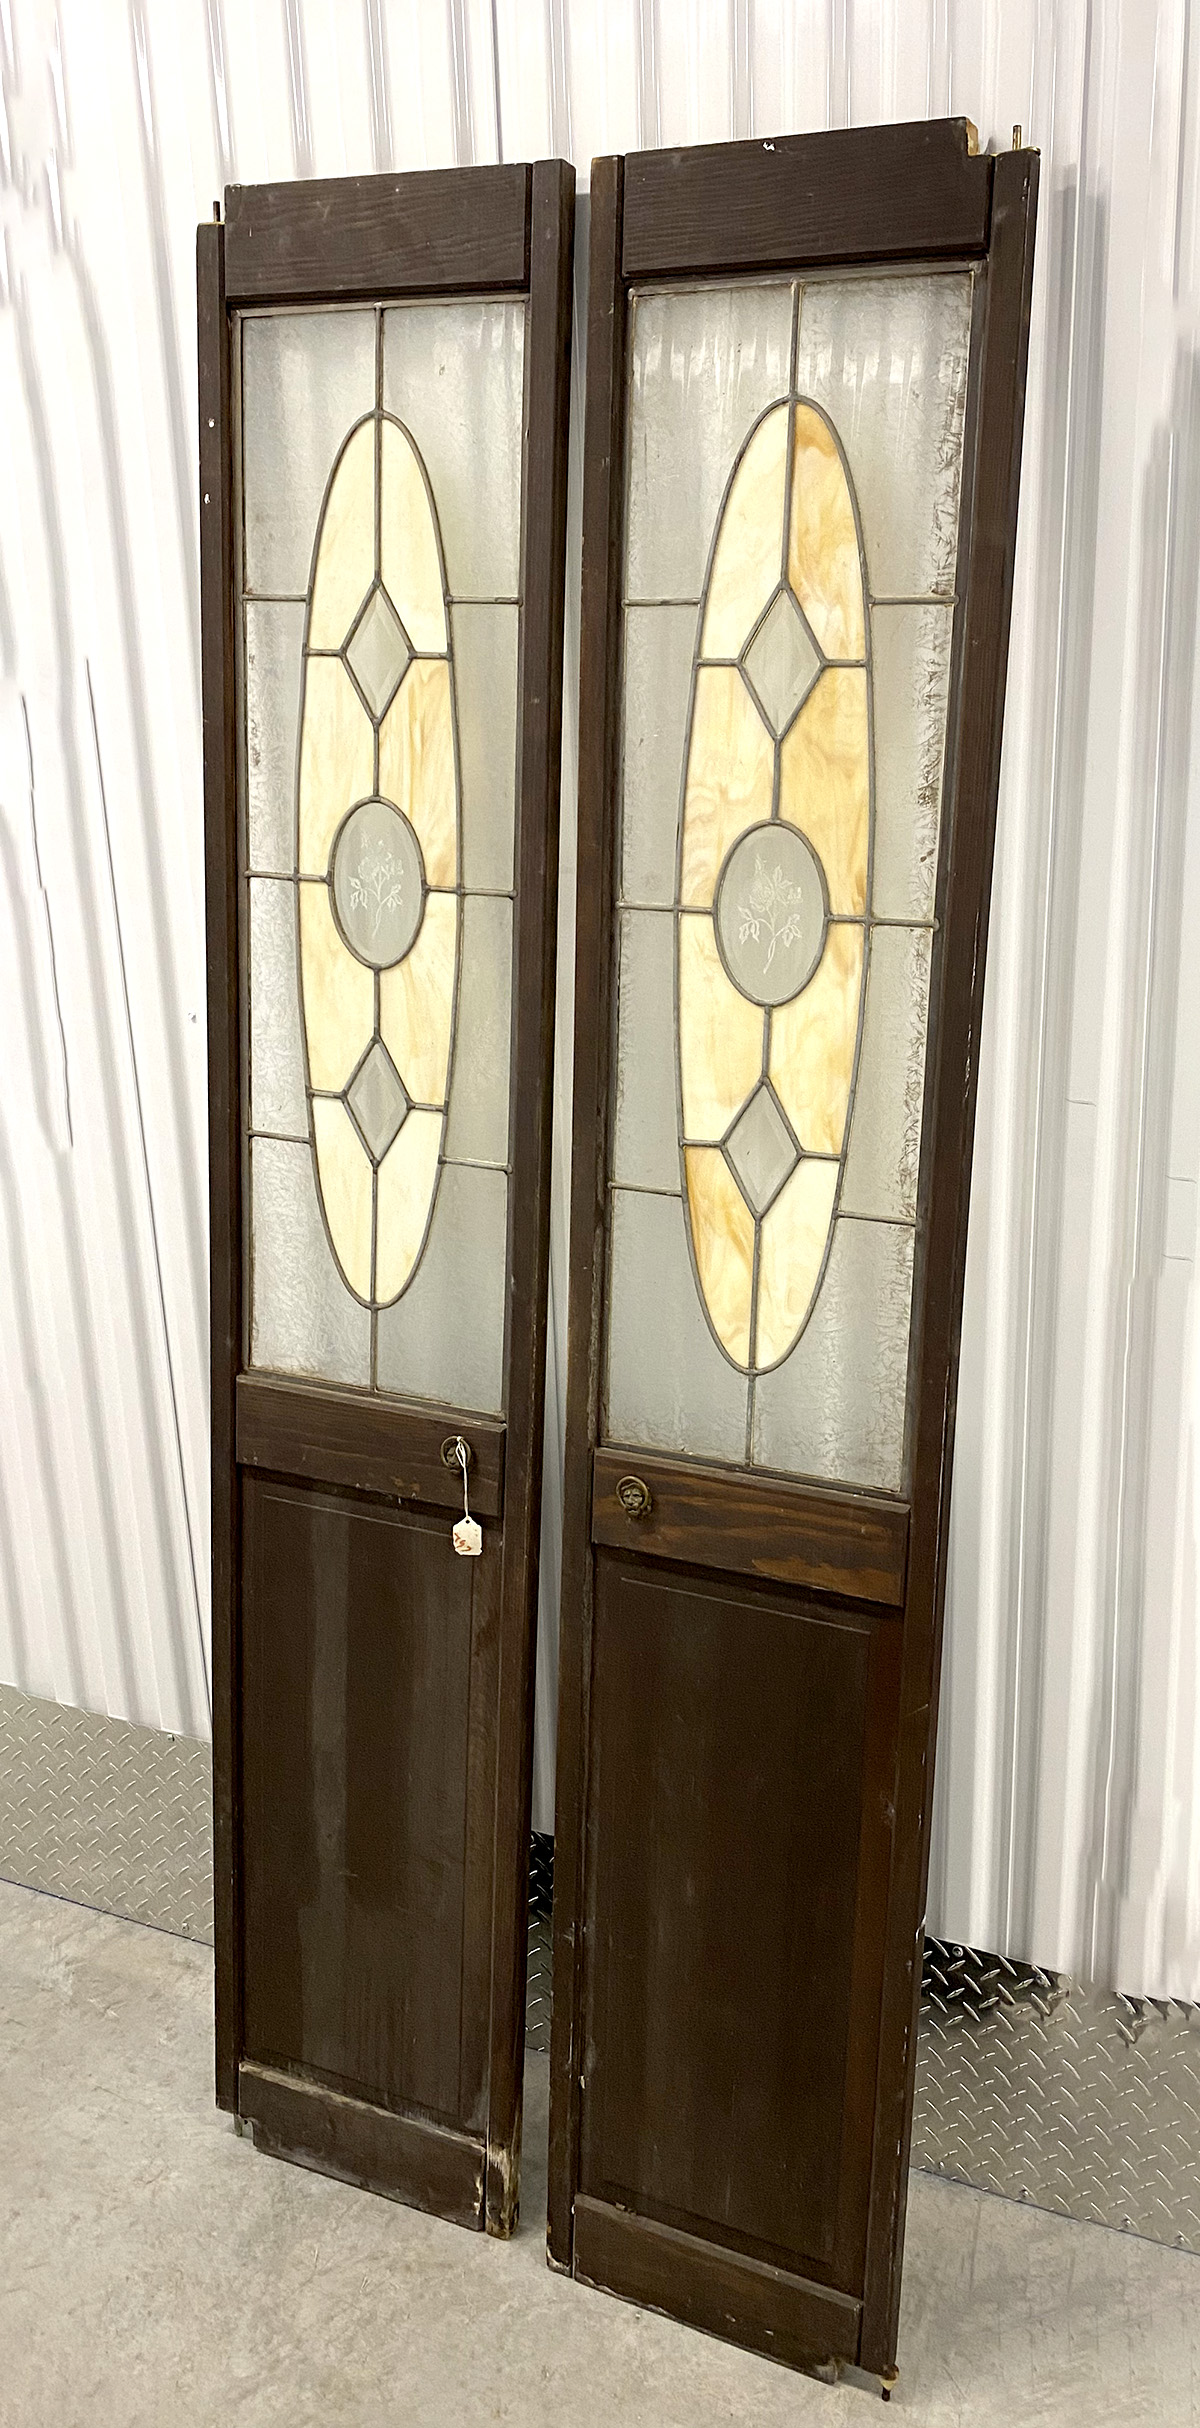 2 ARCHITECTURAL STAINED GLASS DOORS: